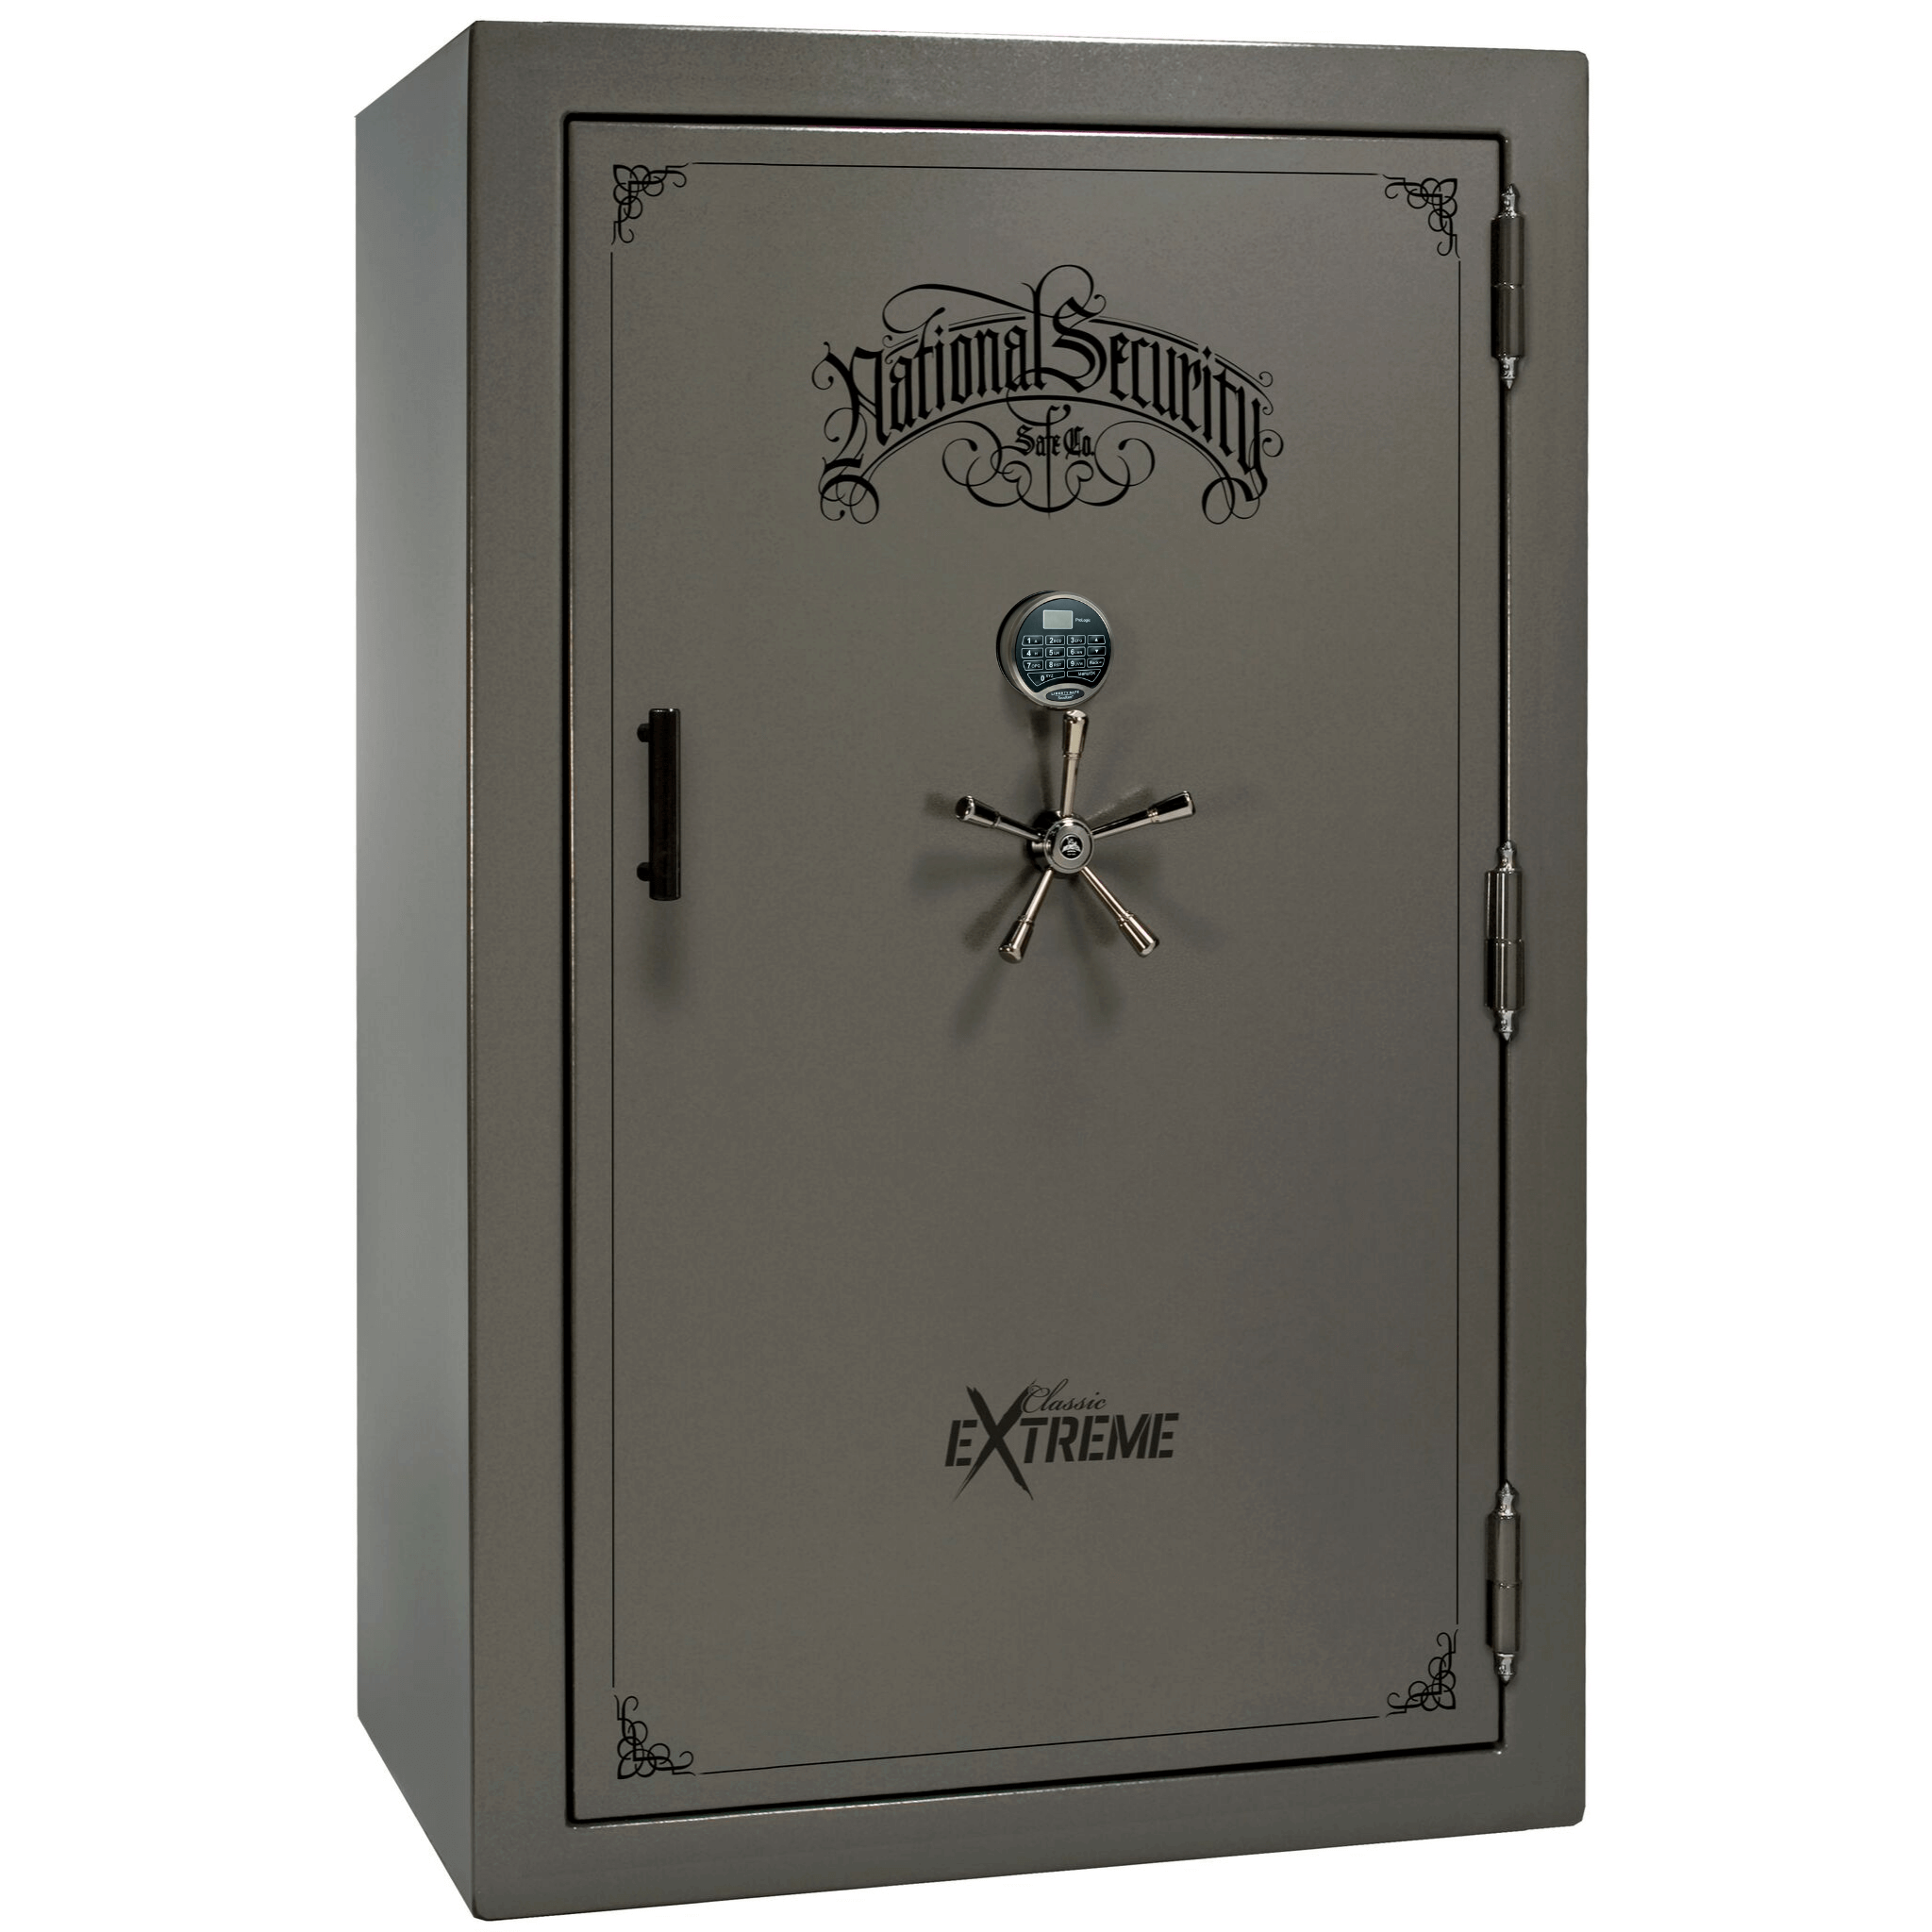 Classic Select Series | Level 6 Security | 90 Minute Fire Protection, photo 21